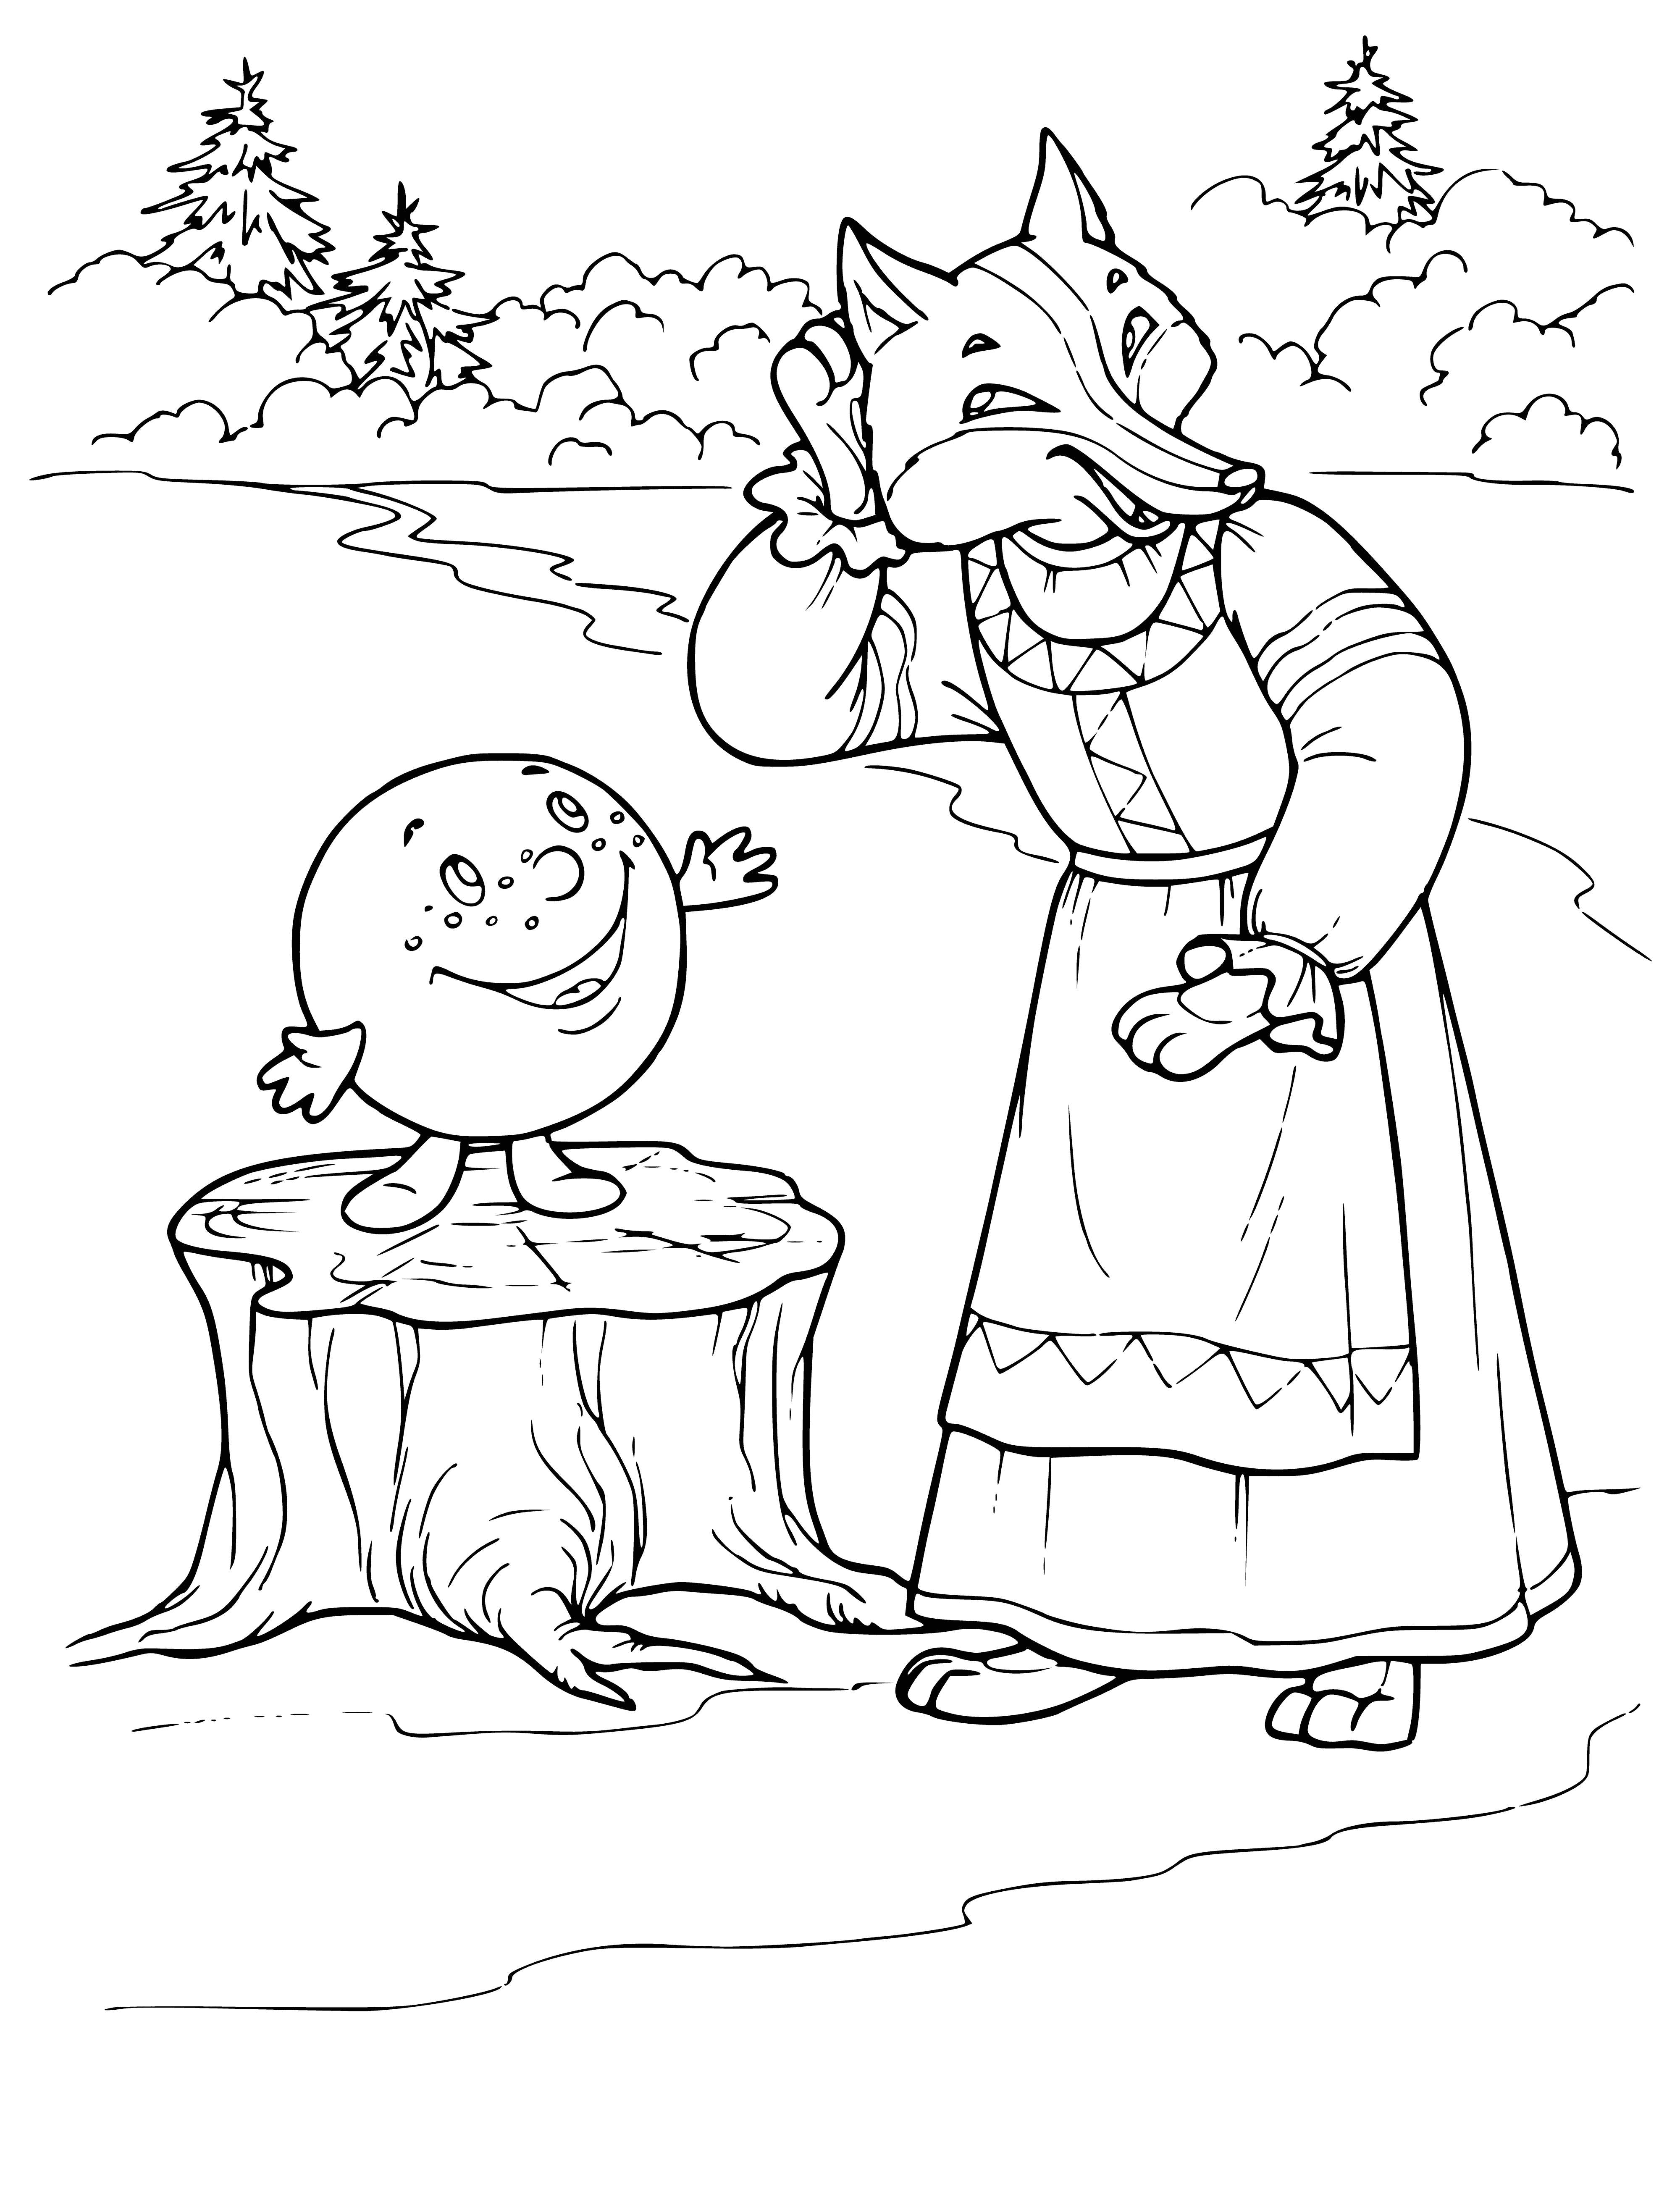 Sly Fox coloring page